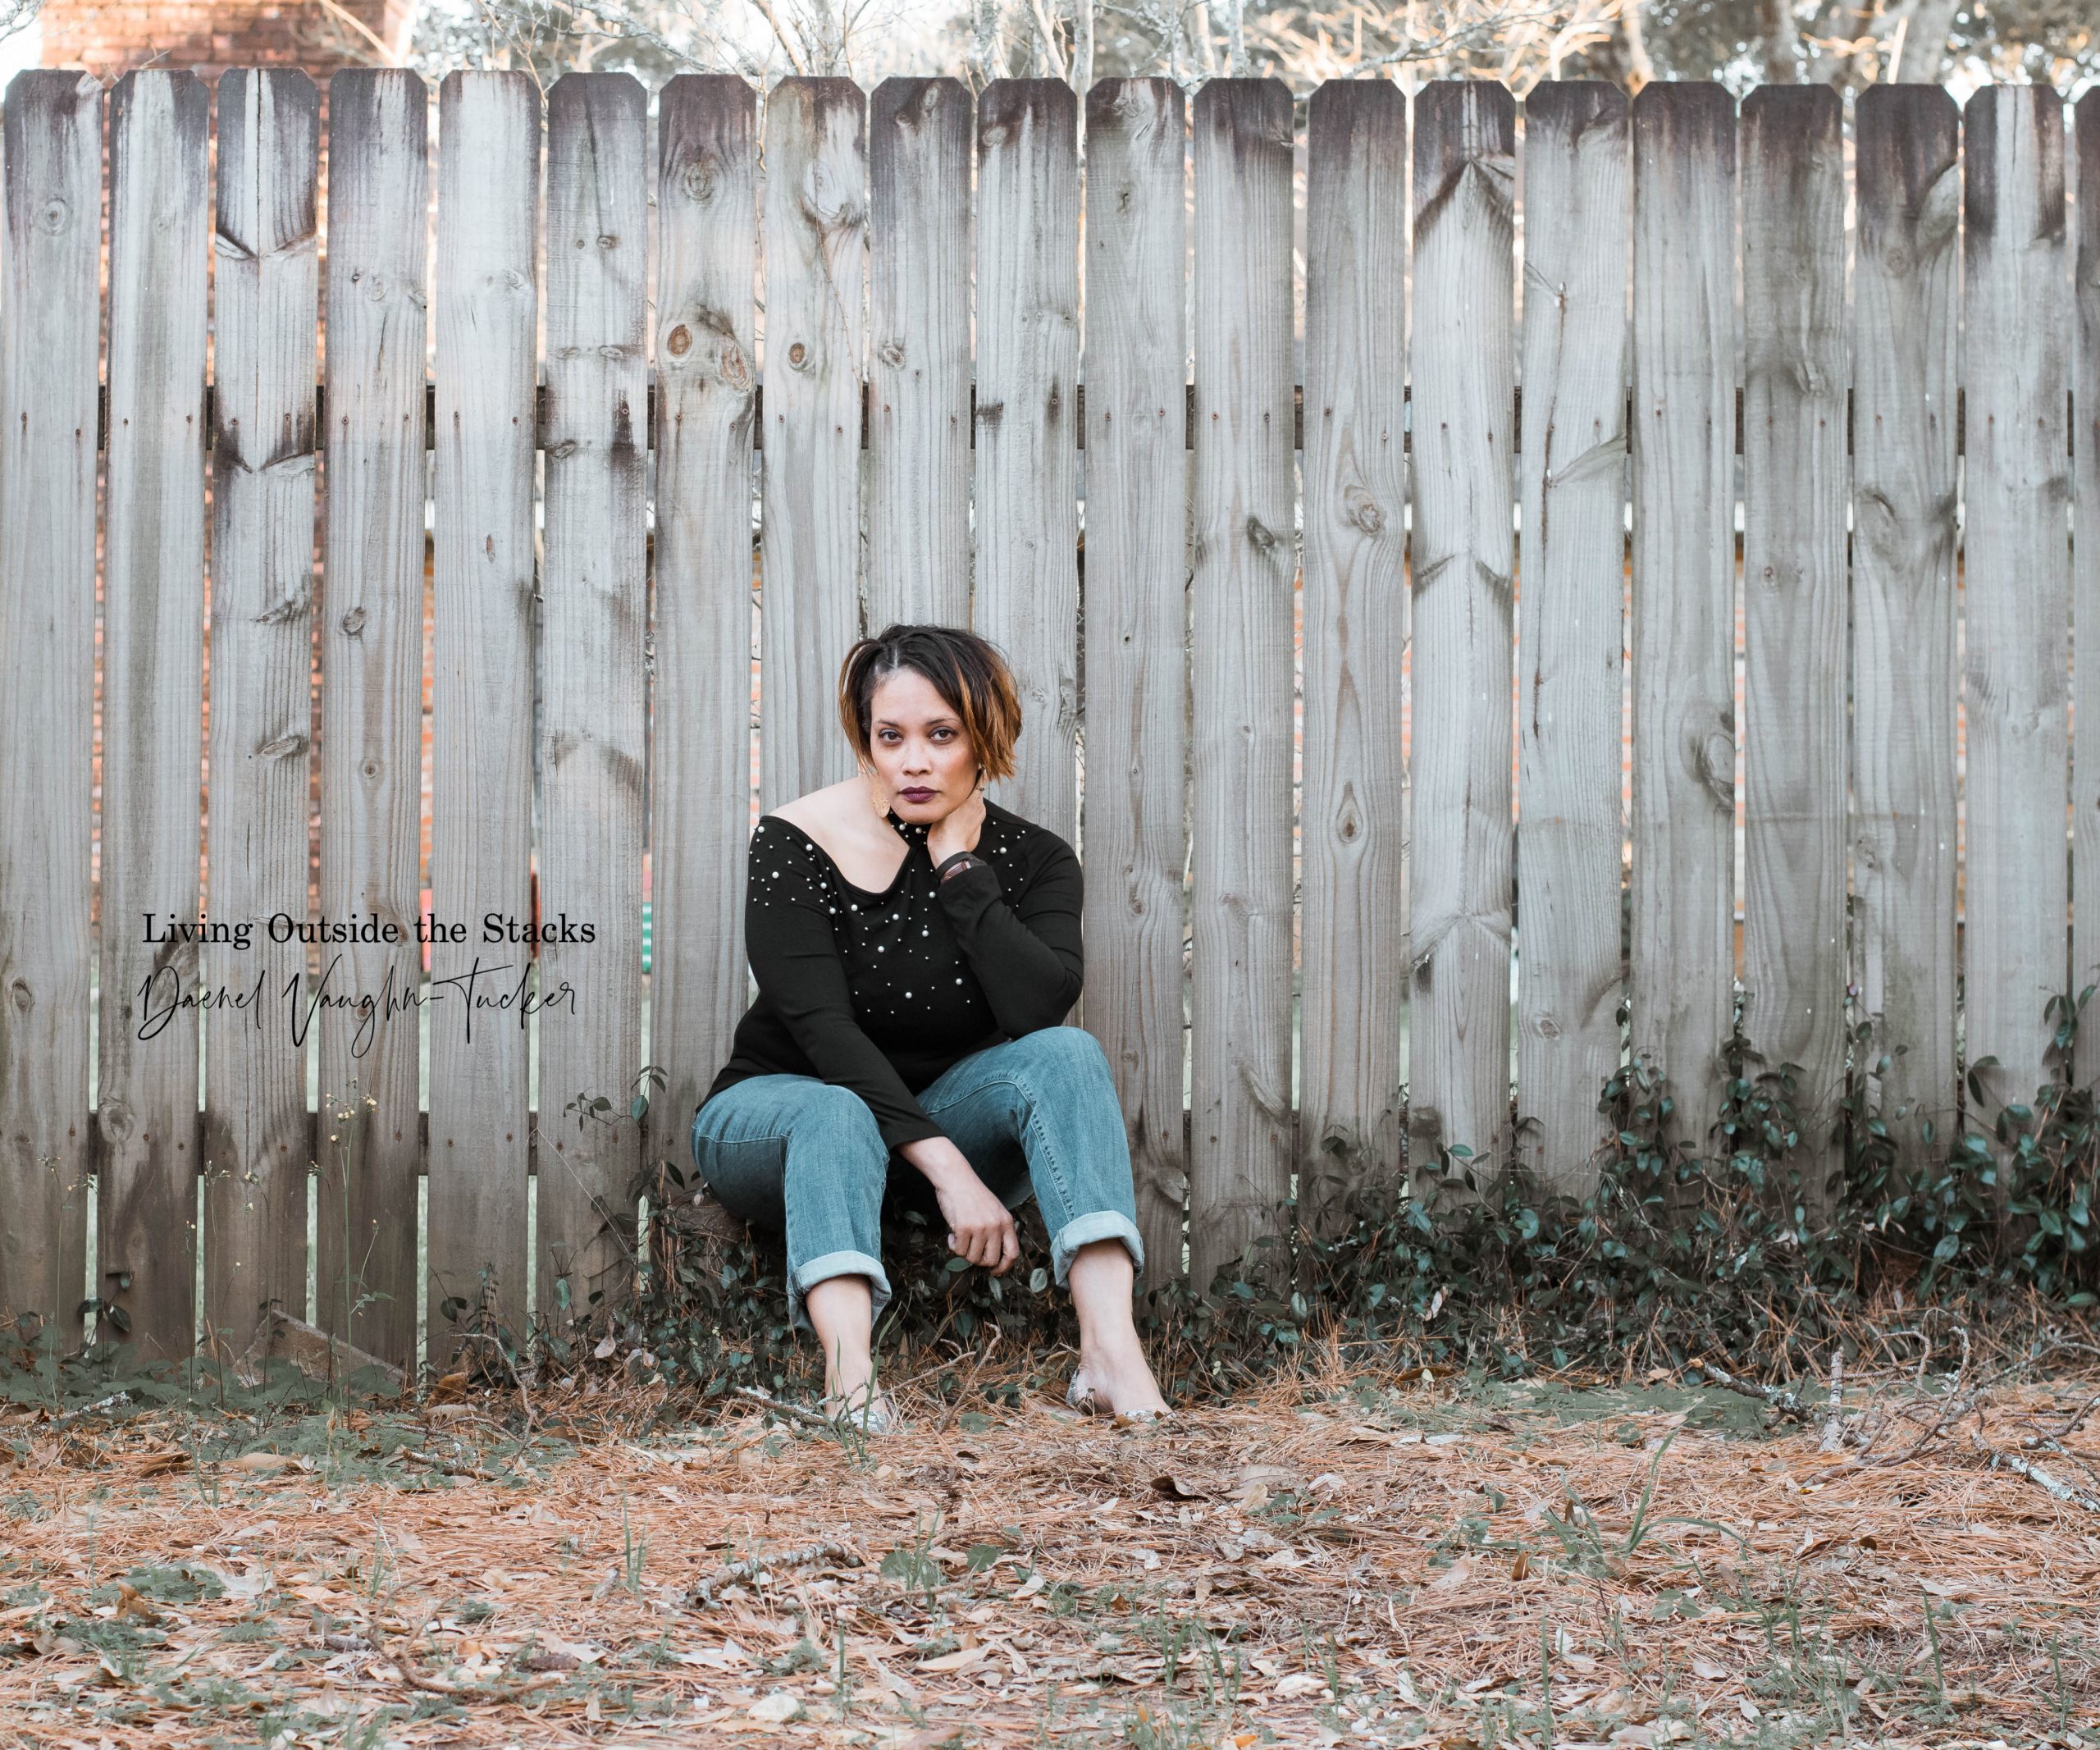 Black One Shoulder Sweater Boyfriend Jeans and Snake Print Flats {living outside the stacks}